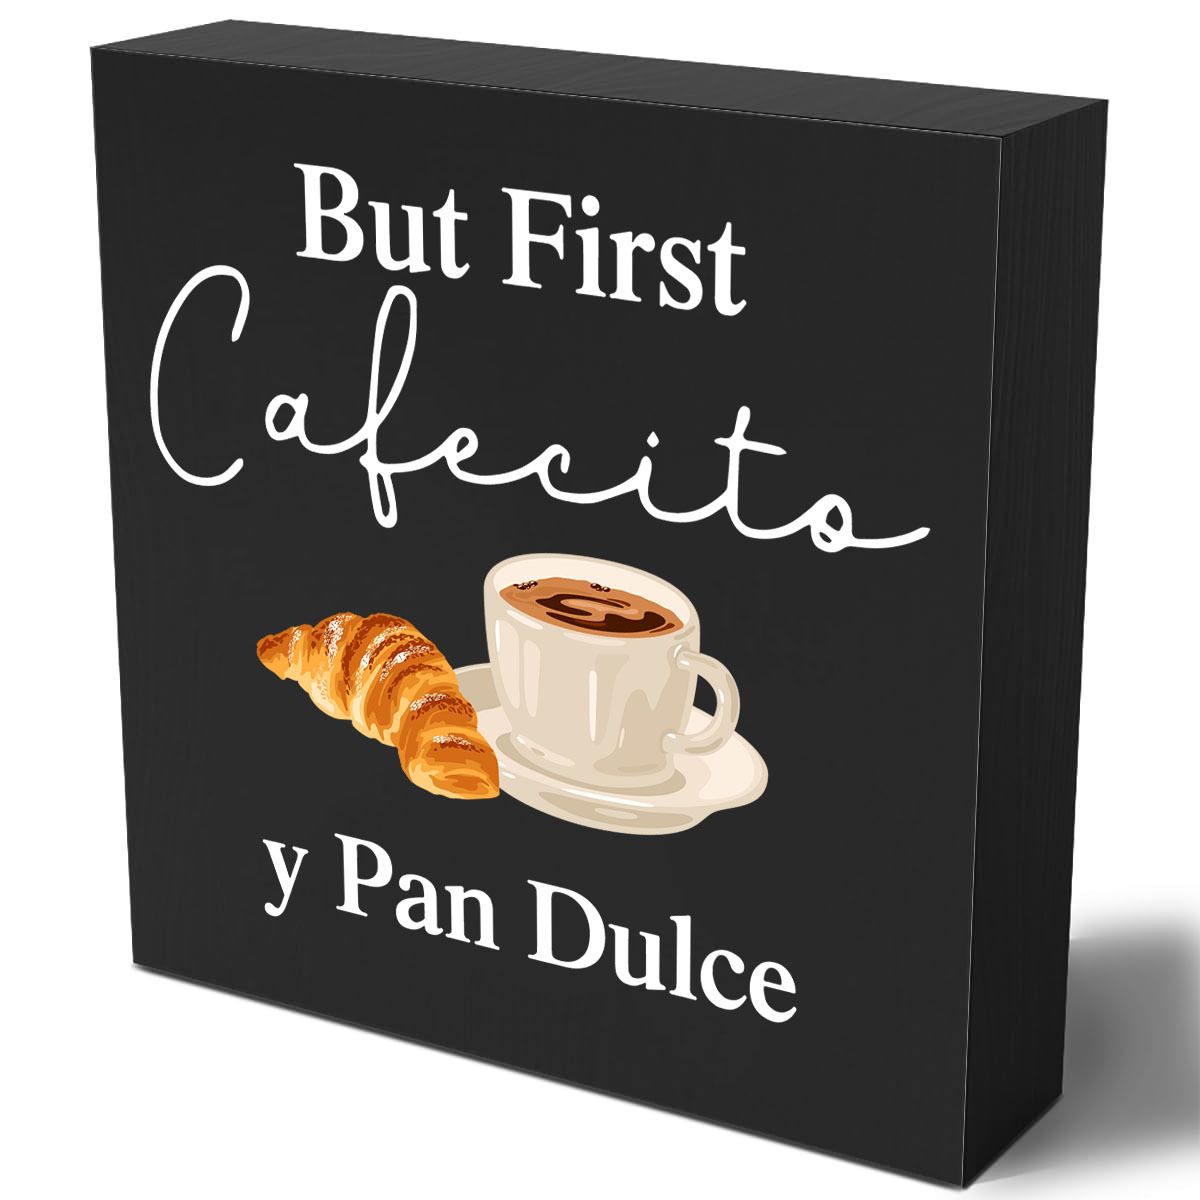 

1pc, Rustic Coffee Bar Wall Art Decor - Country But First Cafecito Y Pan Dulce Canvas Print With Frame - Perfect For Home Kitchen, Office, Or Cafe - Unique Desk Sign And Tabletop Decoration